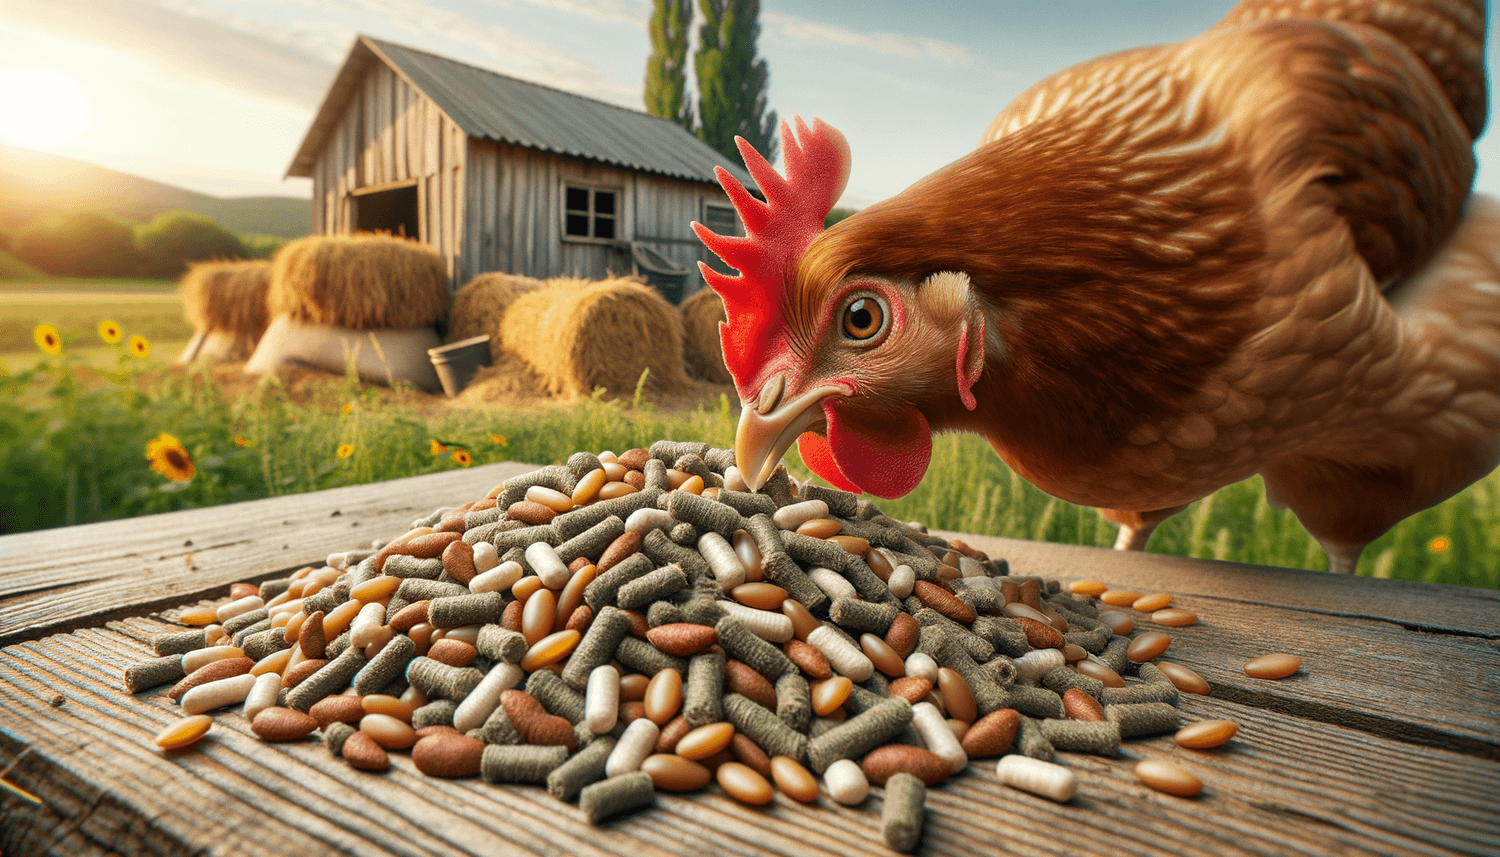 Can Chickens Eat Horse Sweet Feed?